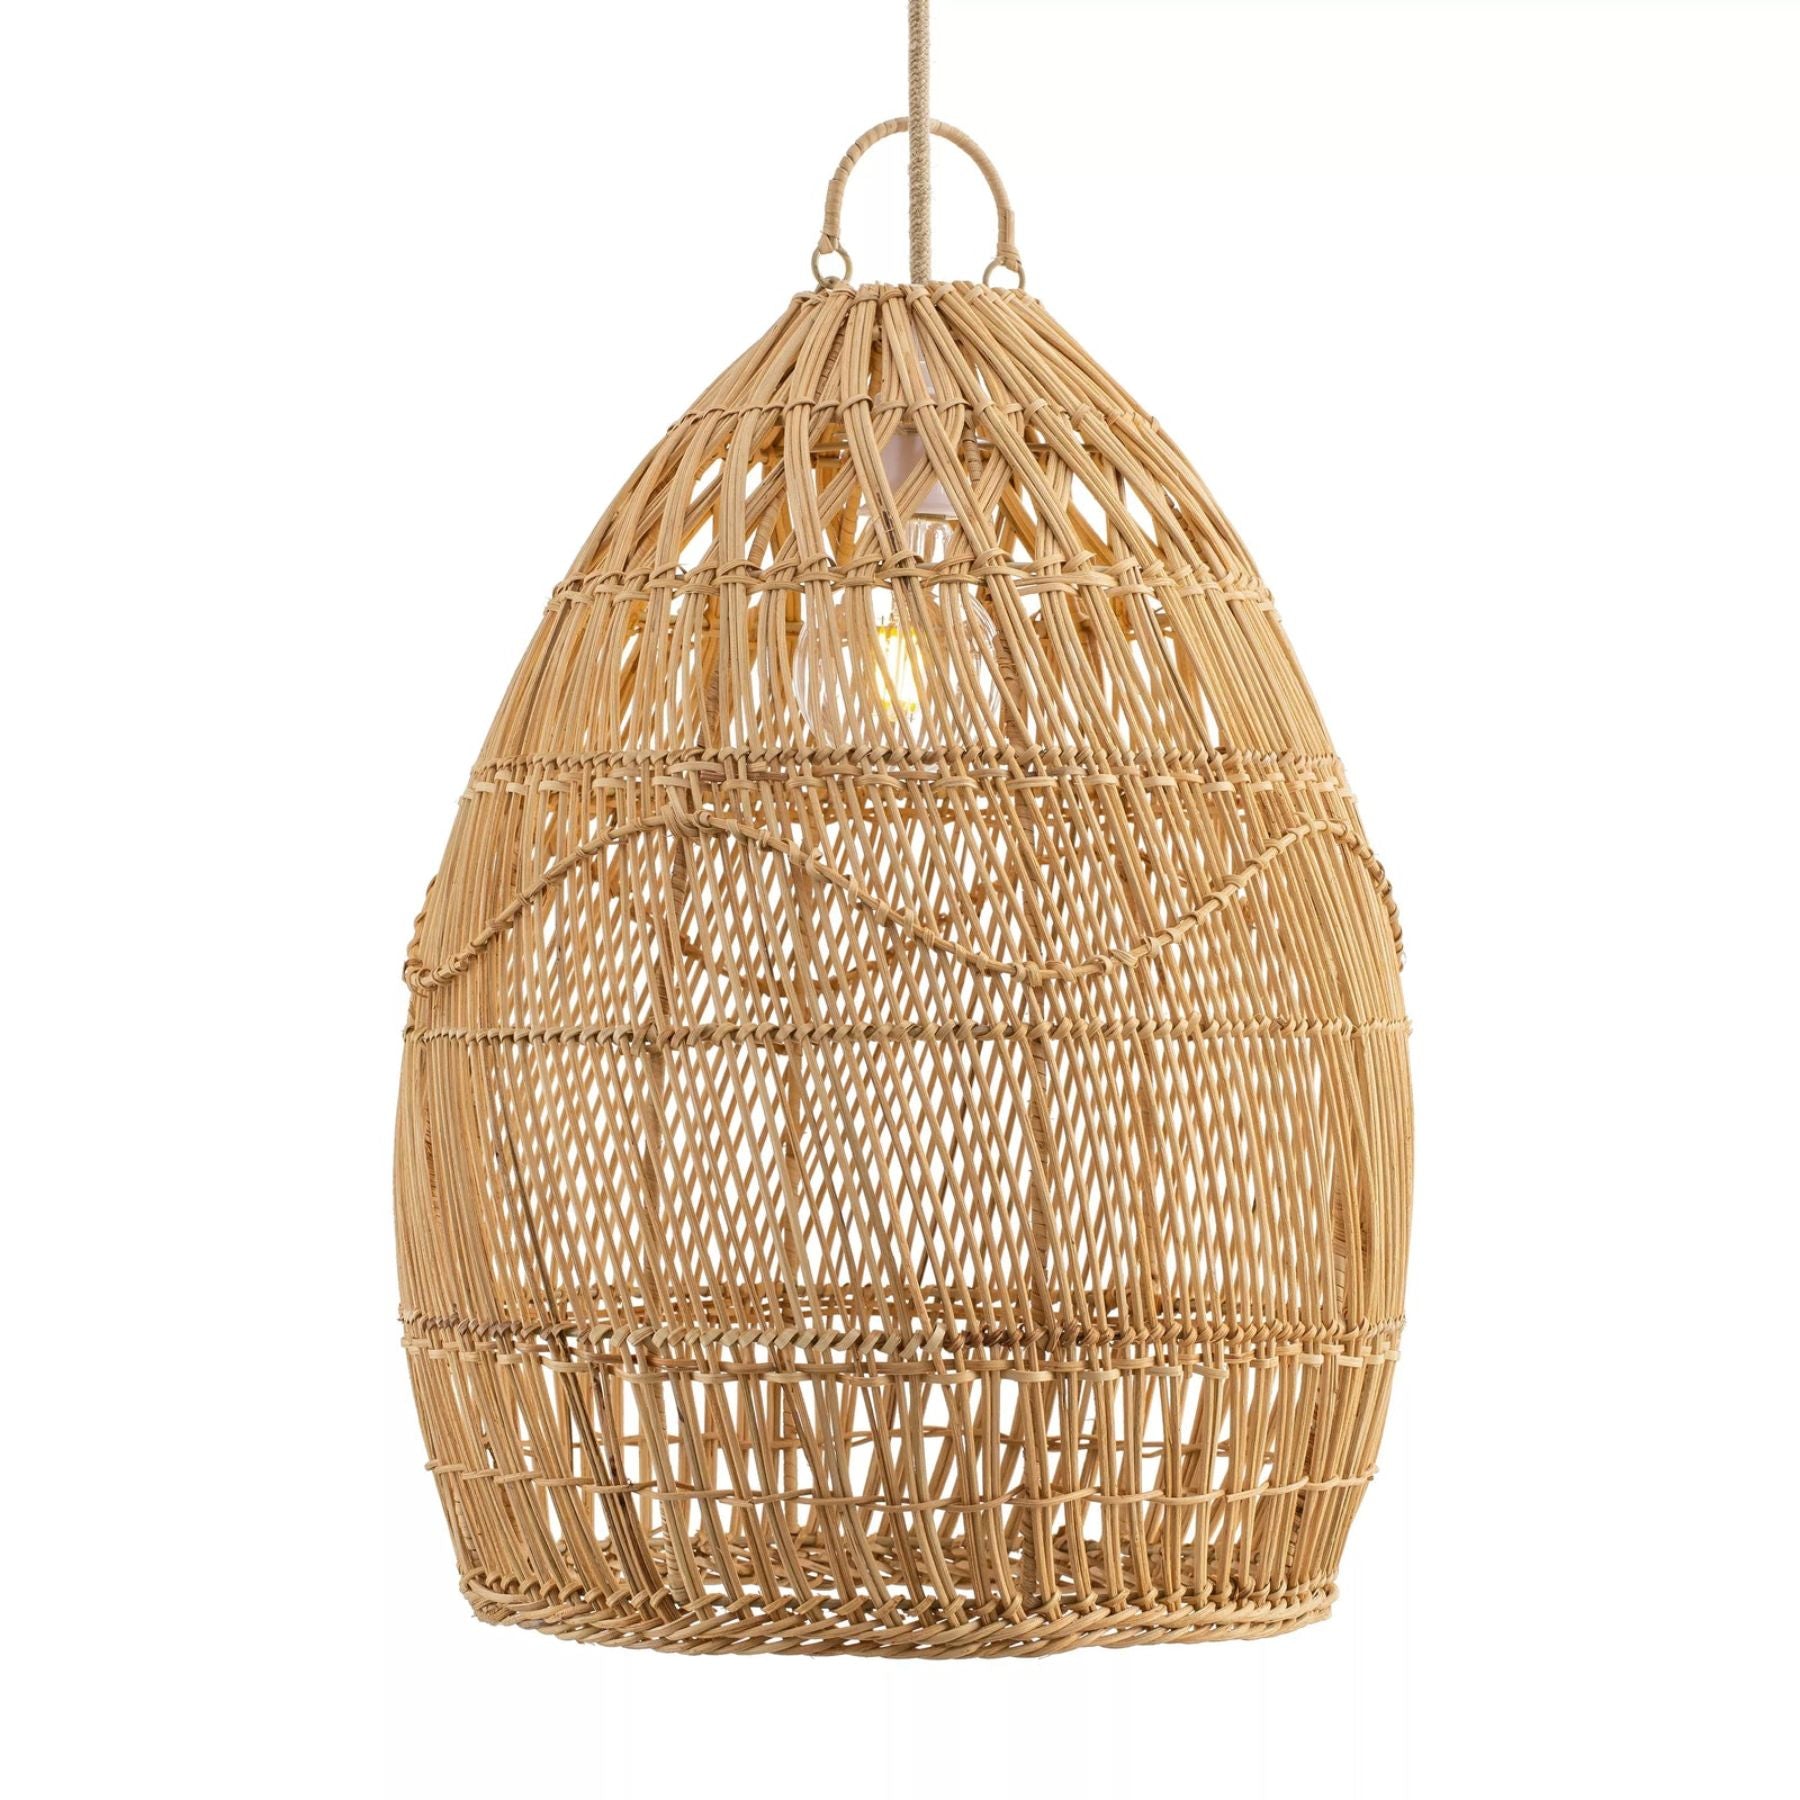 crafted from durable materials the perio pendant lamp is luxurious and exudes a special charm